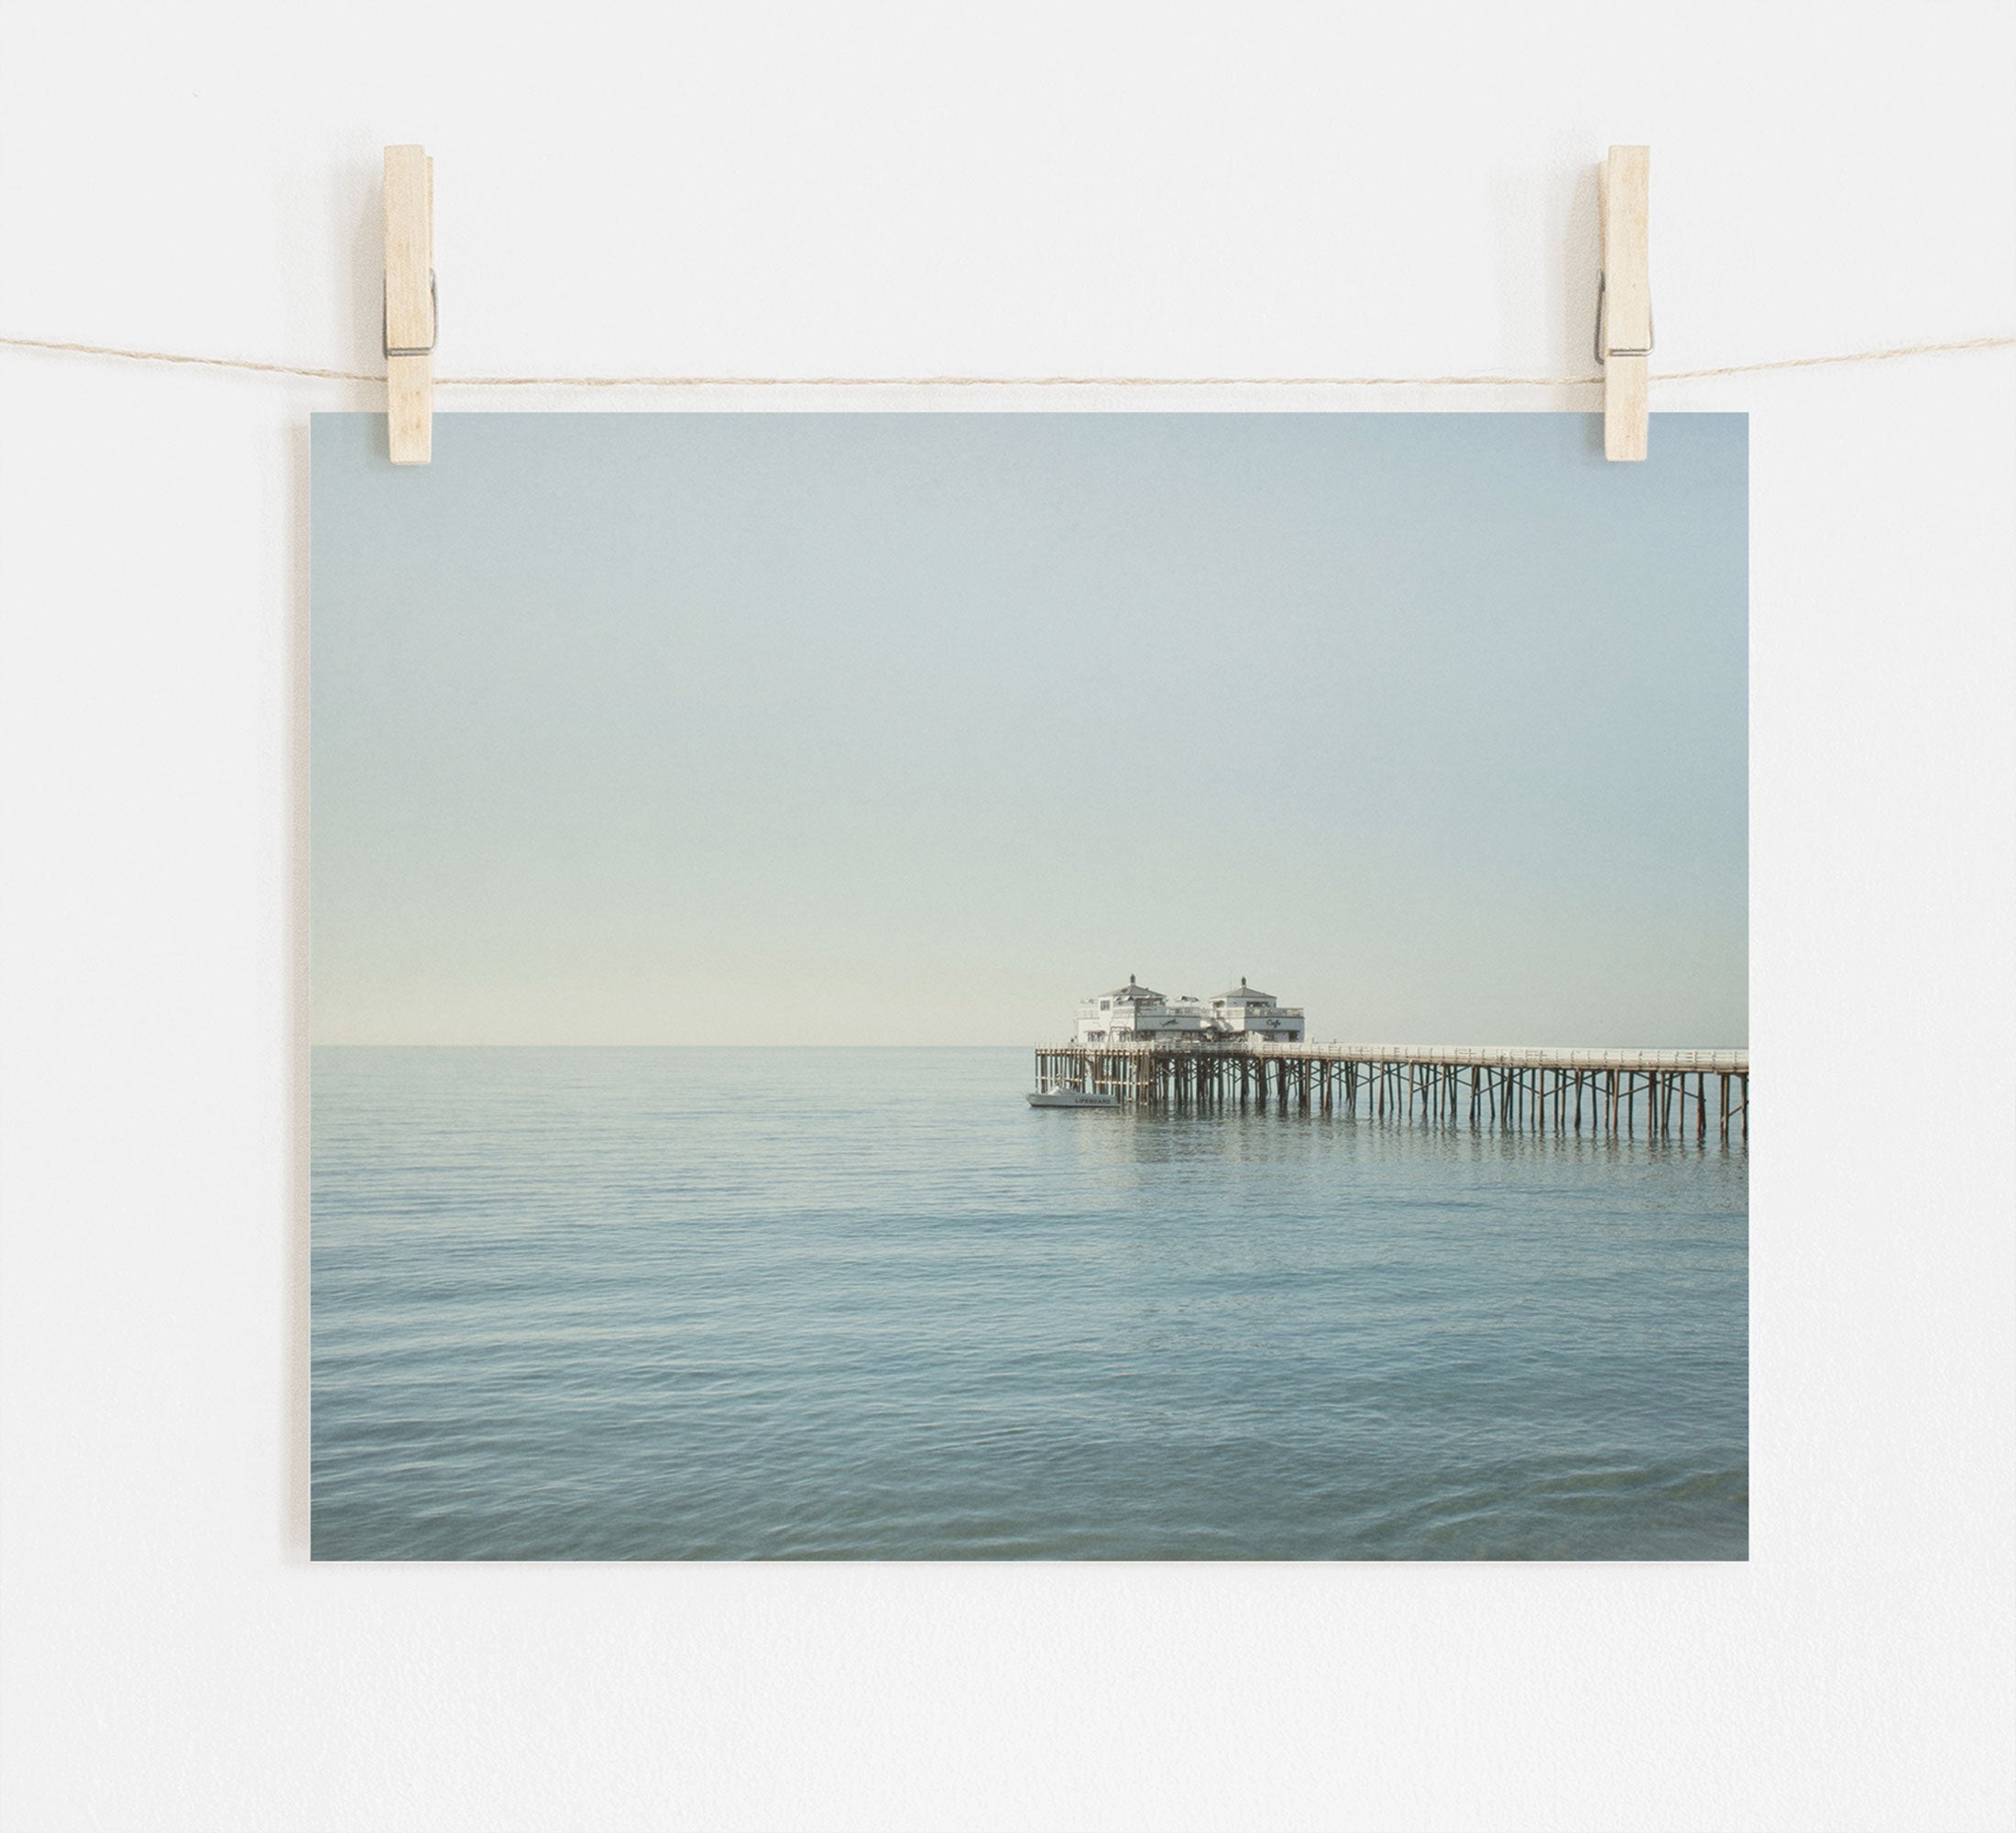 A tranquil photograph of Malibu Pier extending into a calm sea, pinned up against a white wall by two wooden clothespins on a string. Coastal Print of Malibu Pier in California &#39;All Calm in Malibu&#39; by Offley Green.